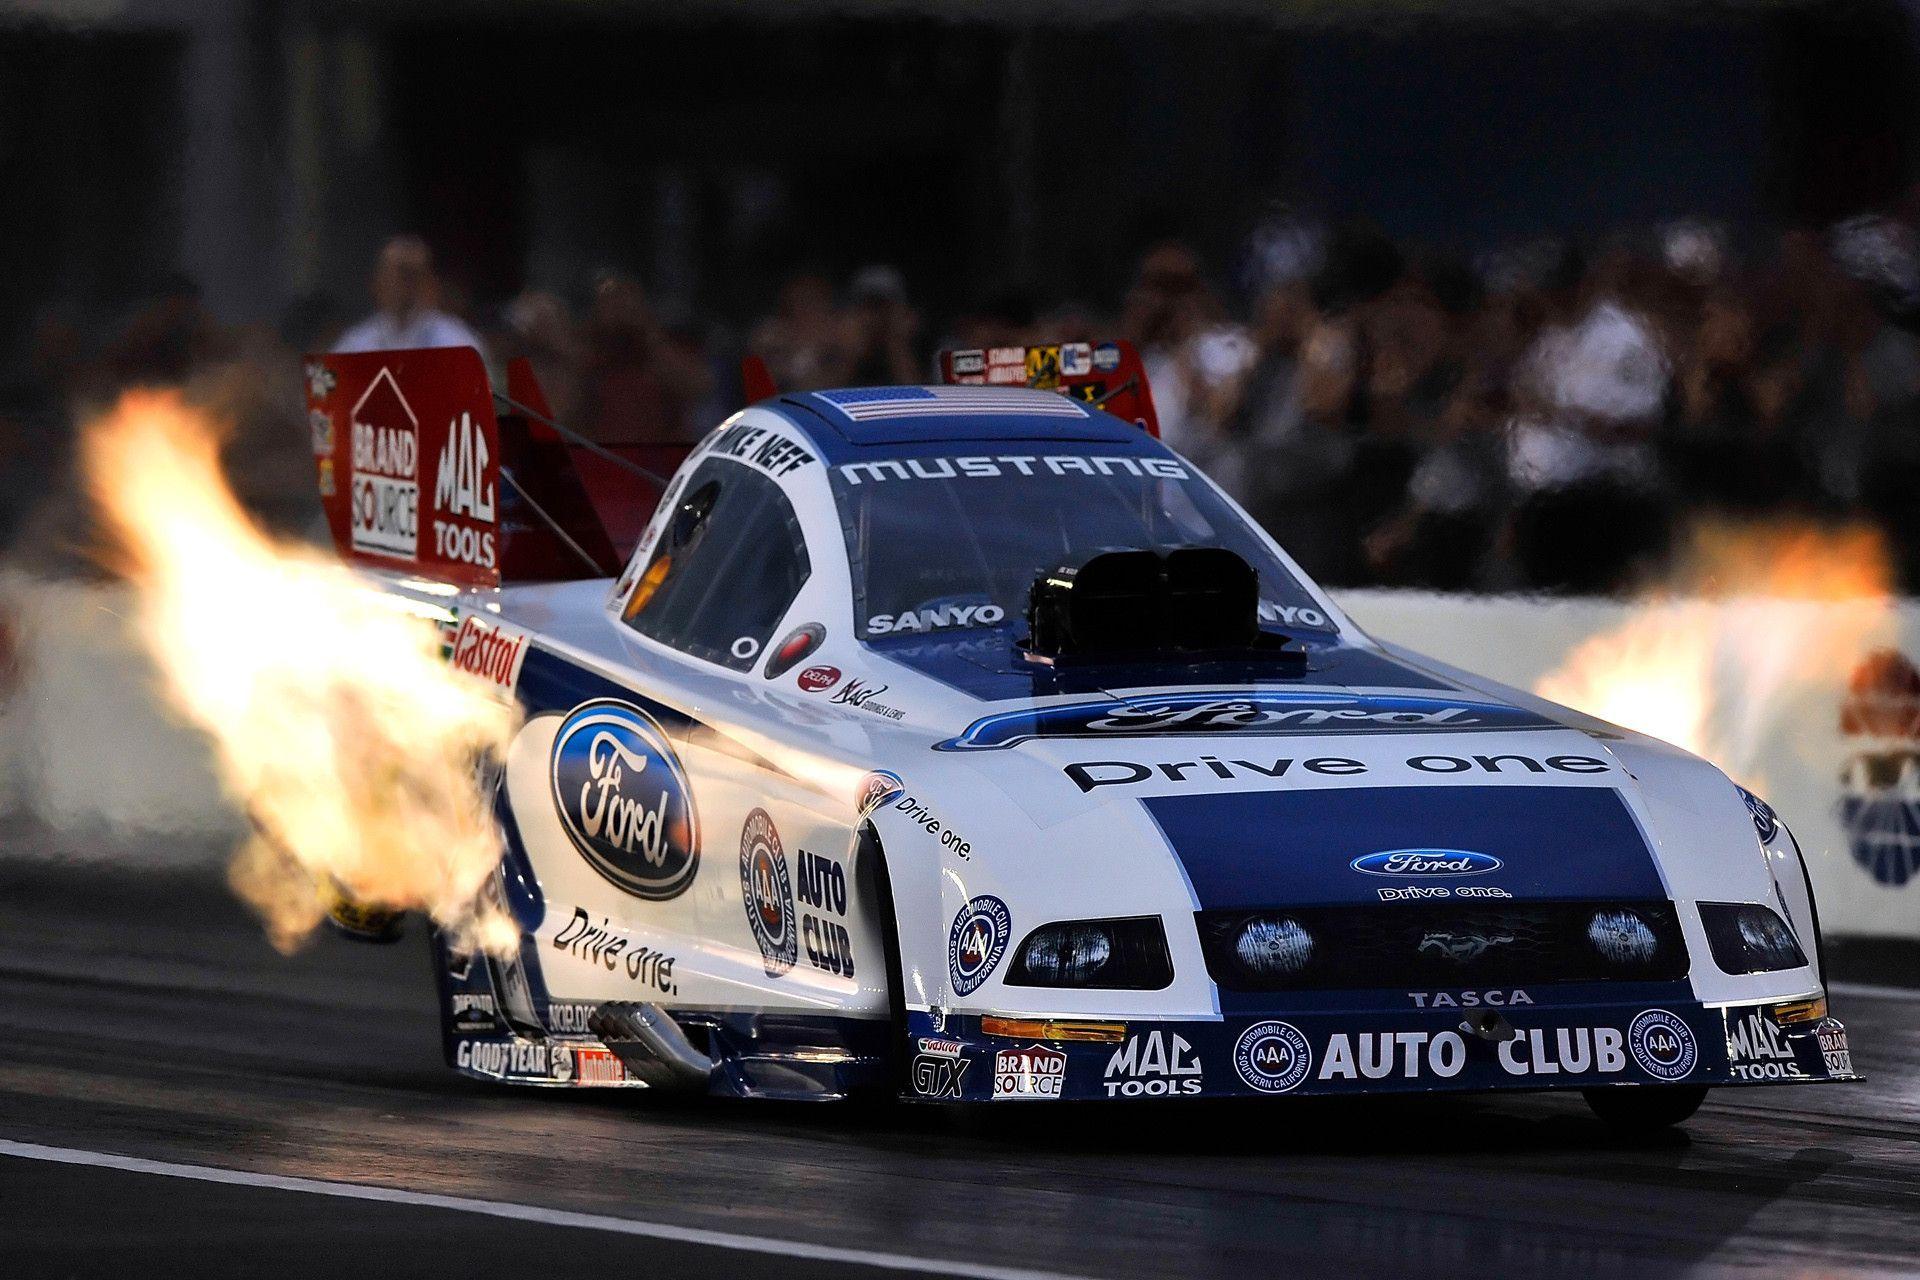 Other Drag Racing picture # 69245. Other photo gallery